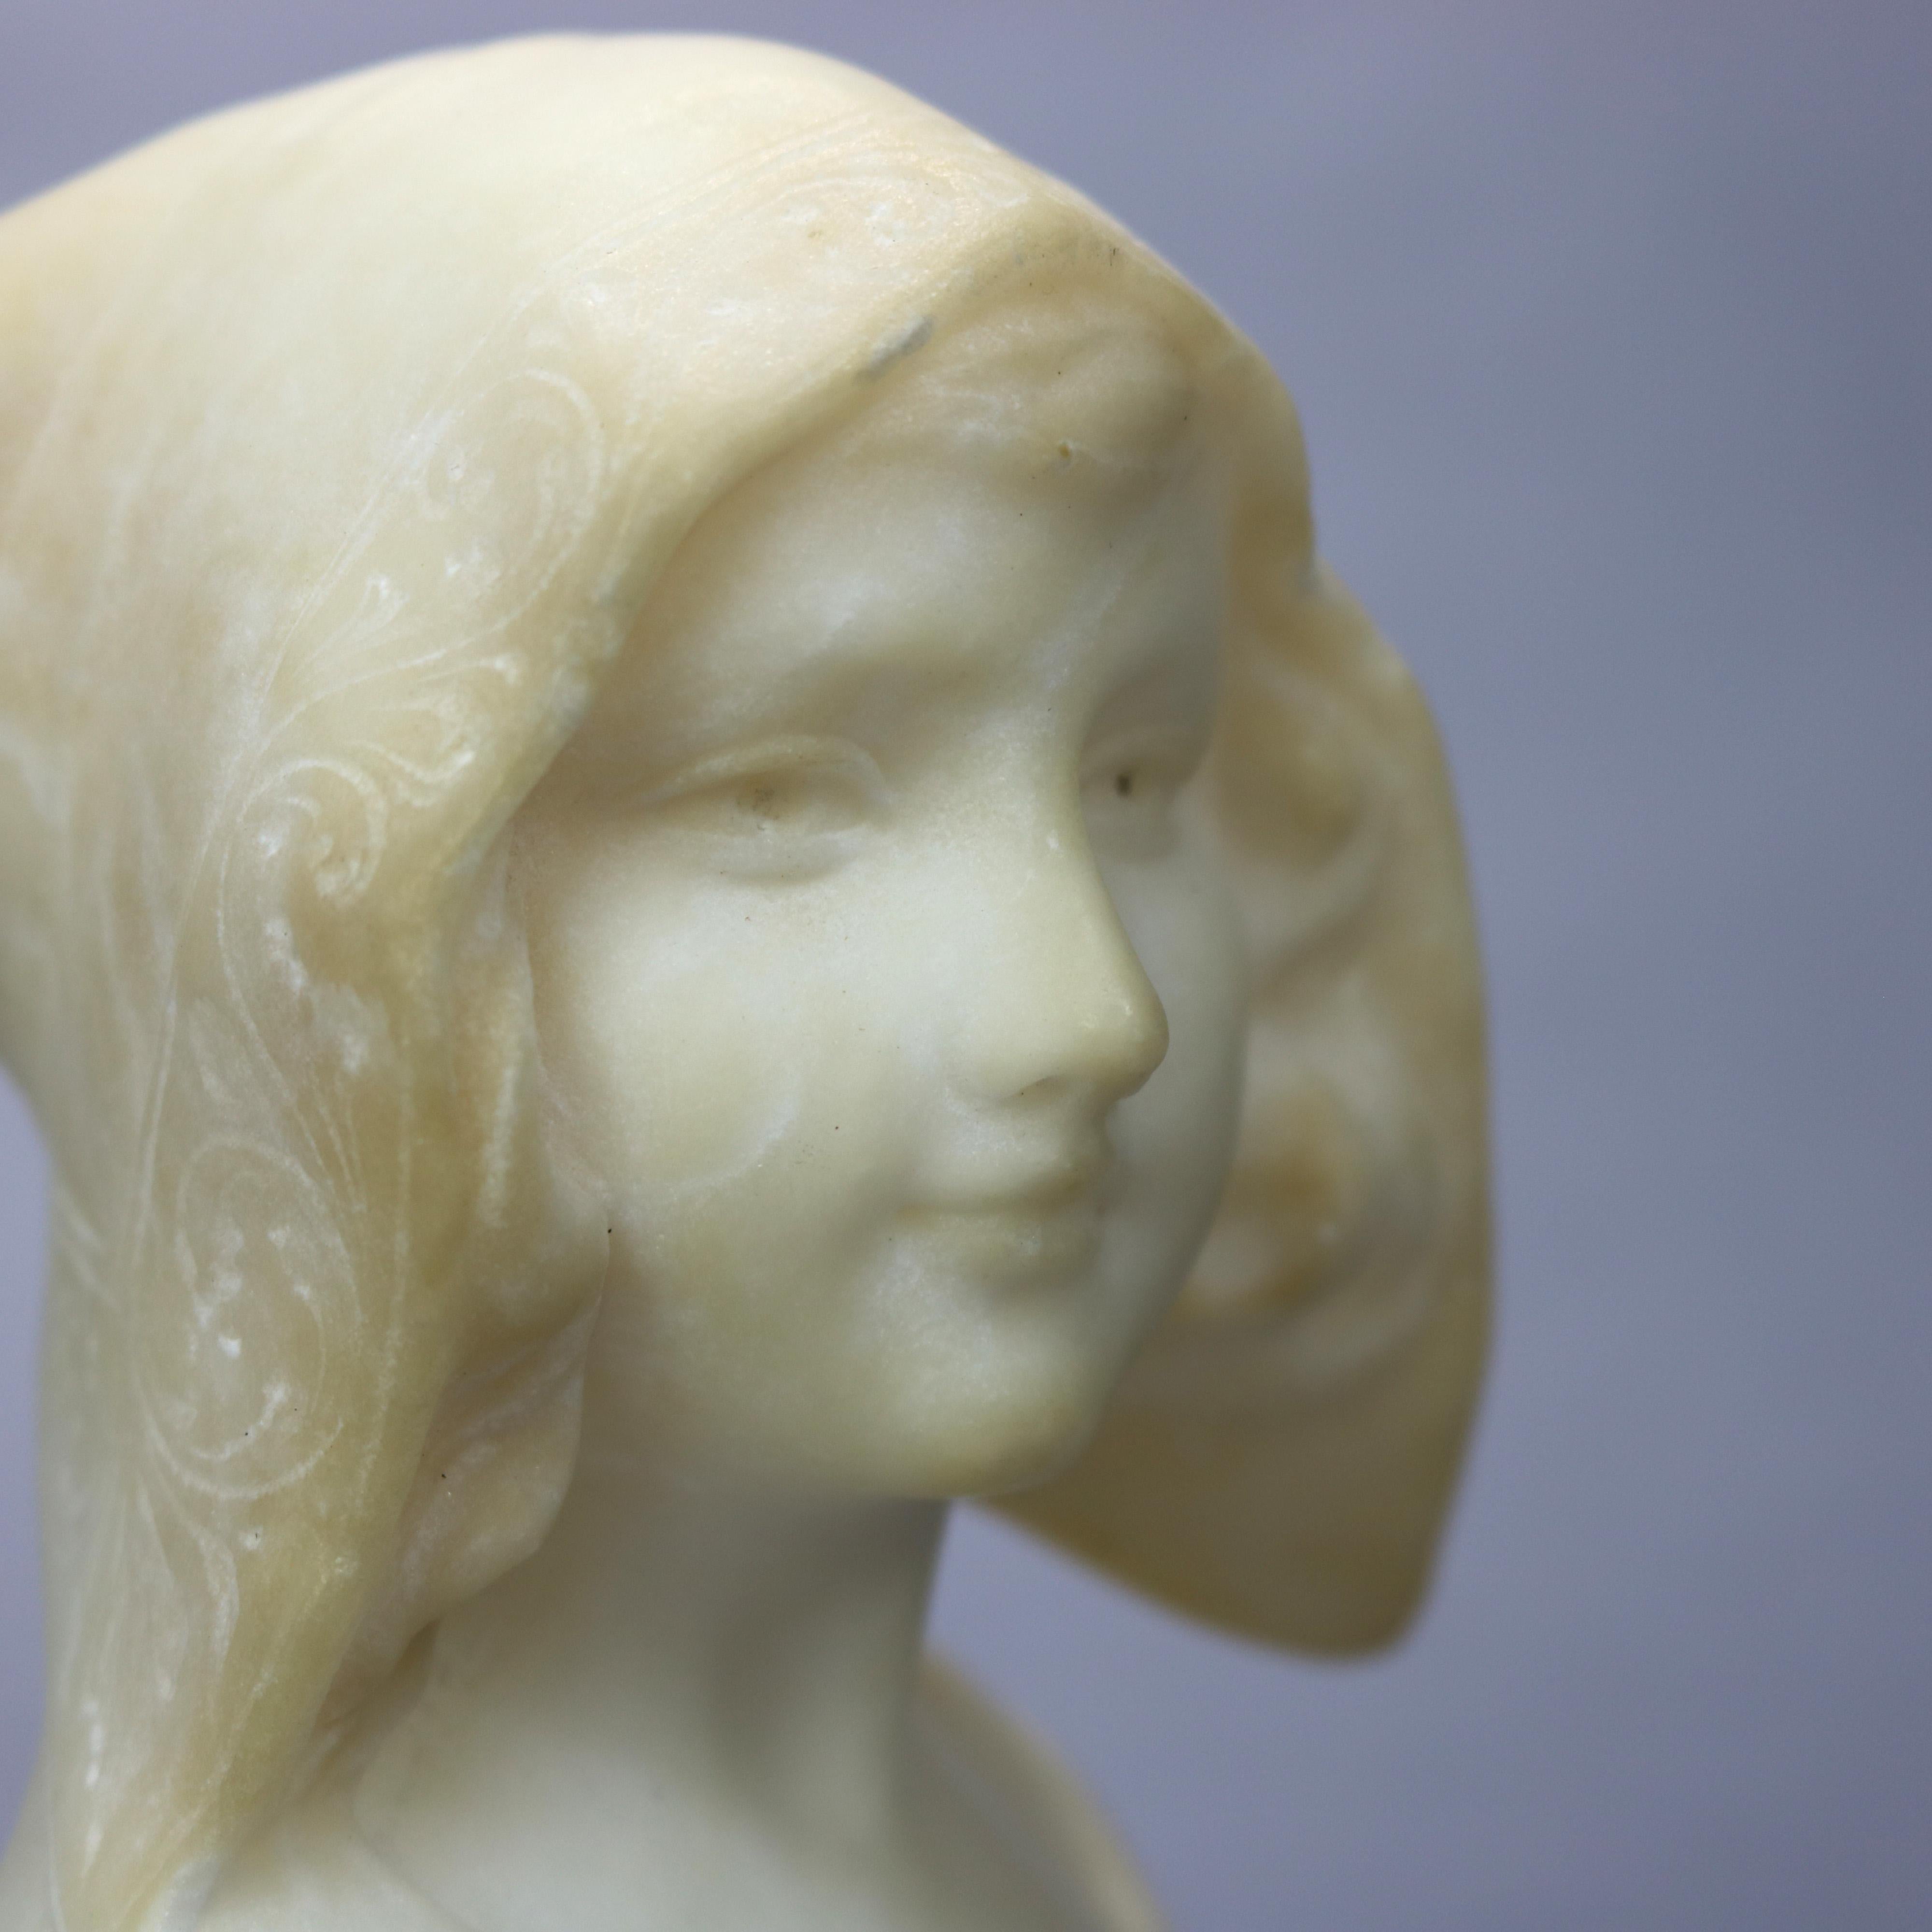 An antique Italian carved marble portrait bust of Joan of Arc, Joan D'Arc, 1890

Measures: 5.75